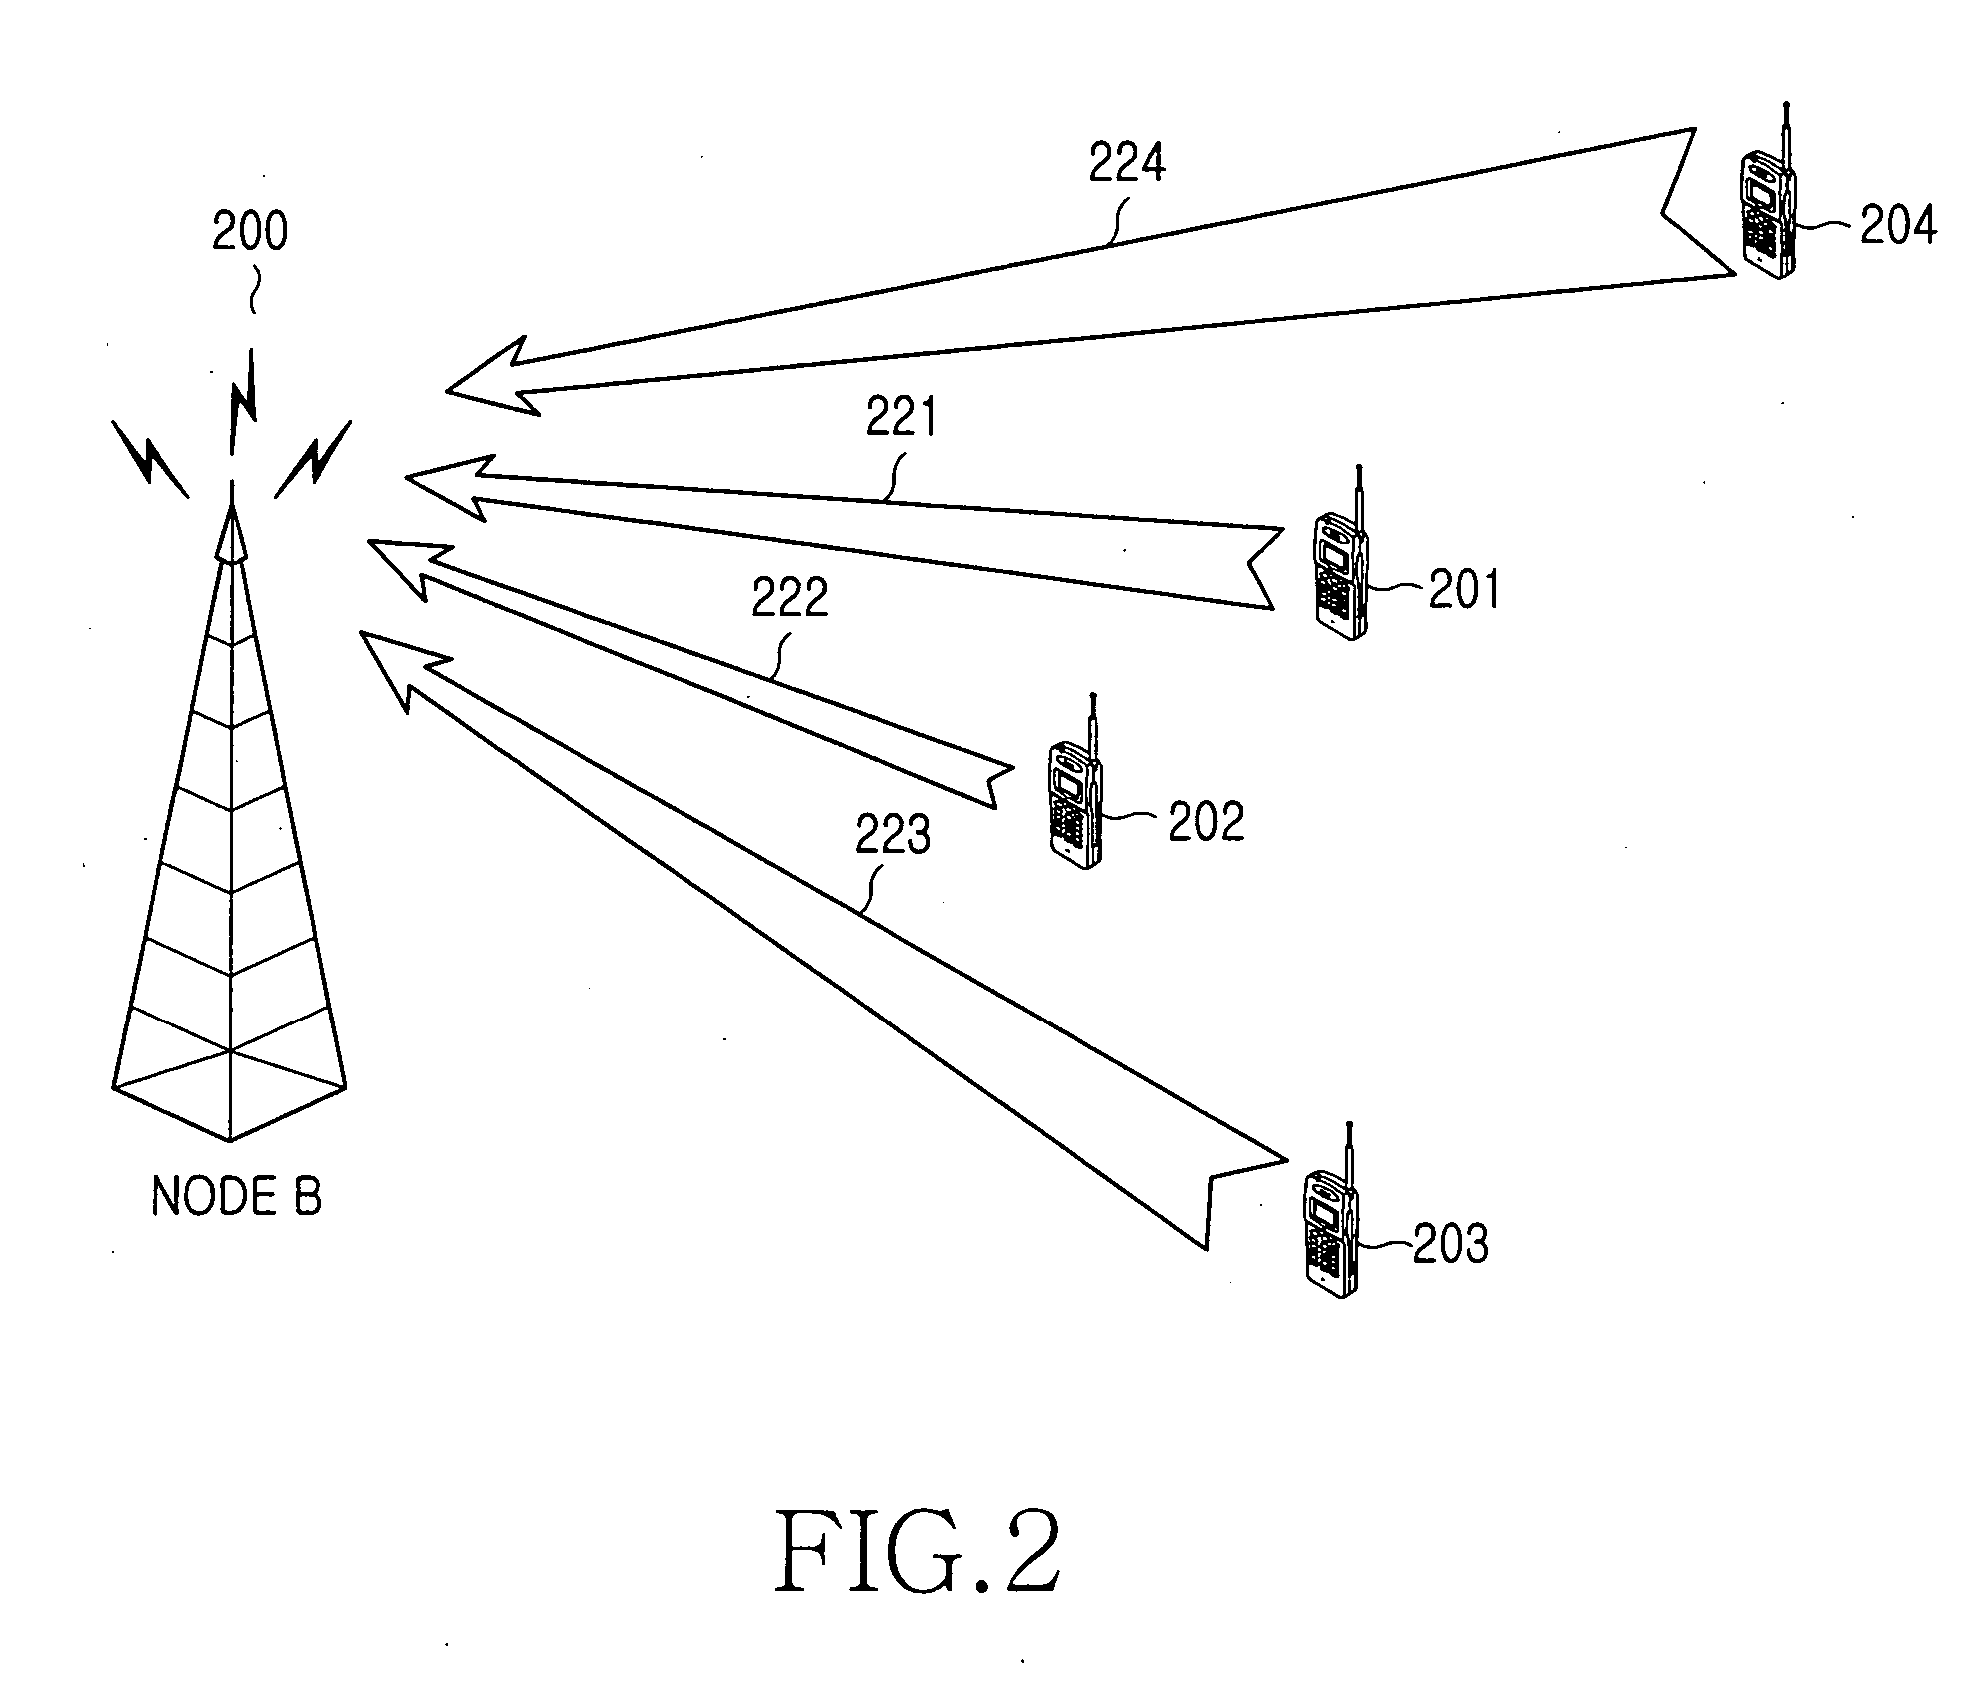 Method and apparatus for reporting a Buffer Status using Node B-estimated Buffer Status information in a mobile communication system